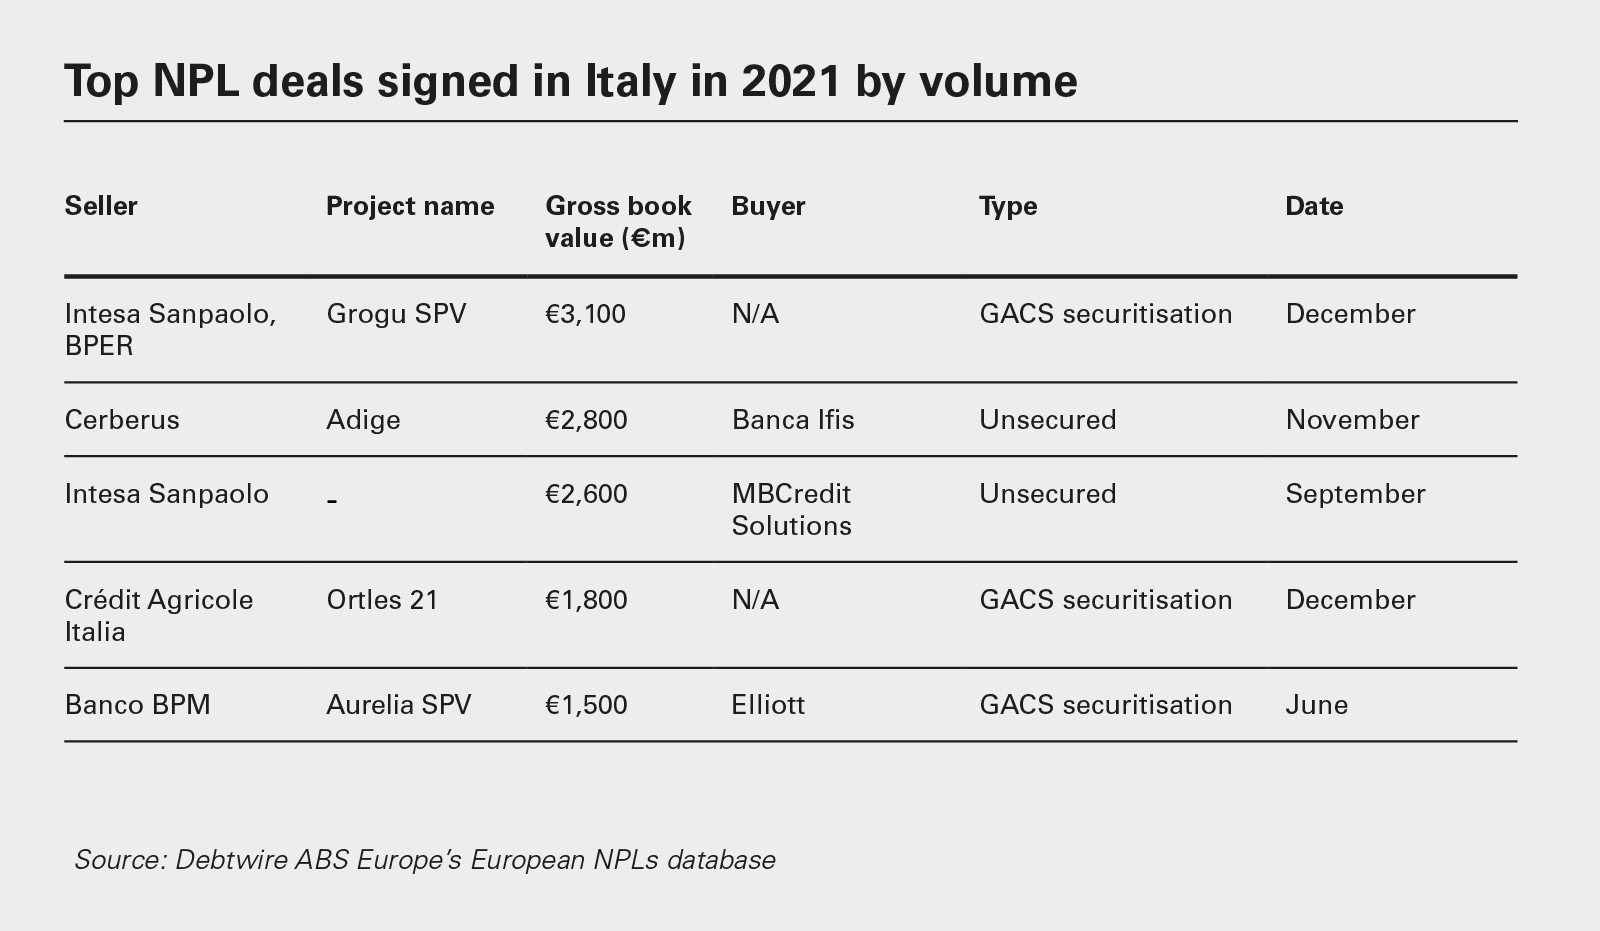 Top NPL deals signed in Italy in 2021 by volume